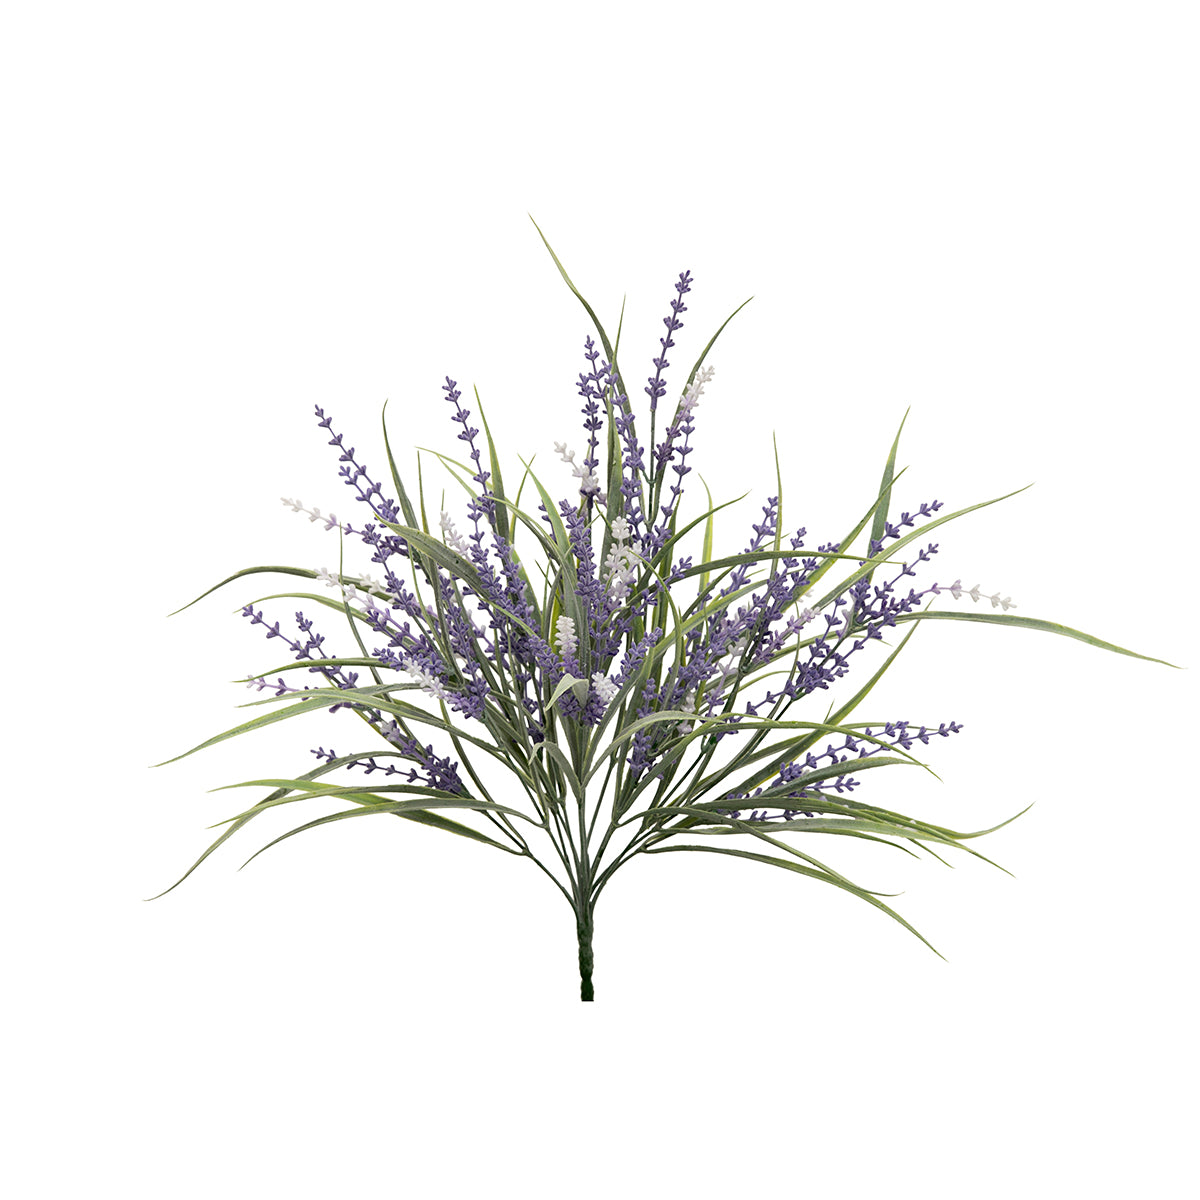 BUSH LAVENDER AND SPIKE GRASS